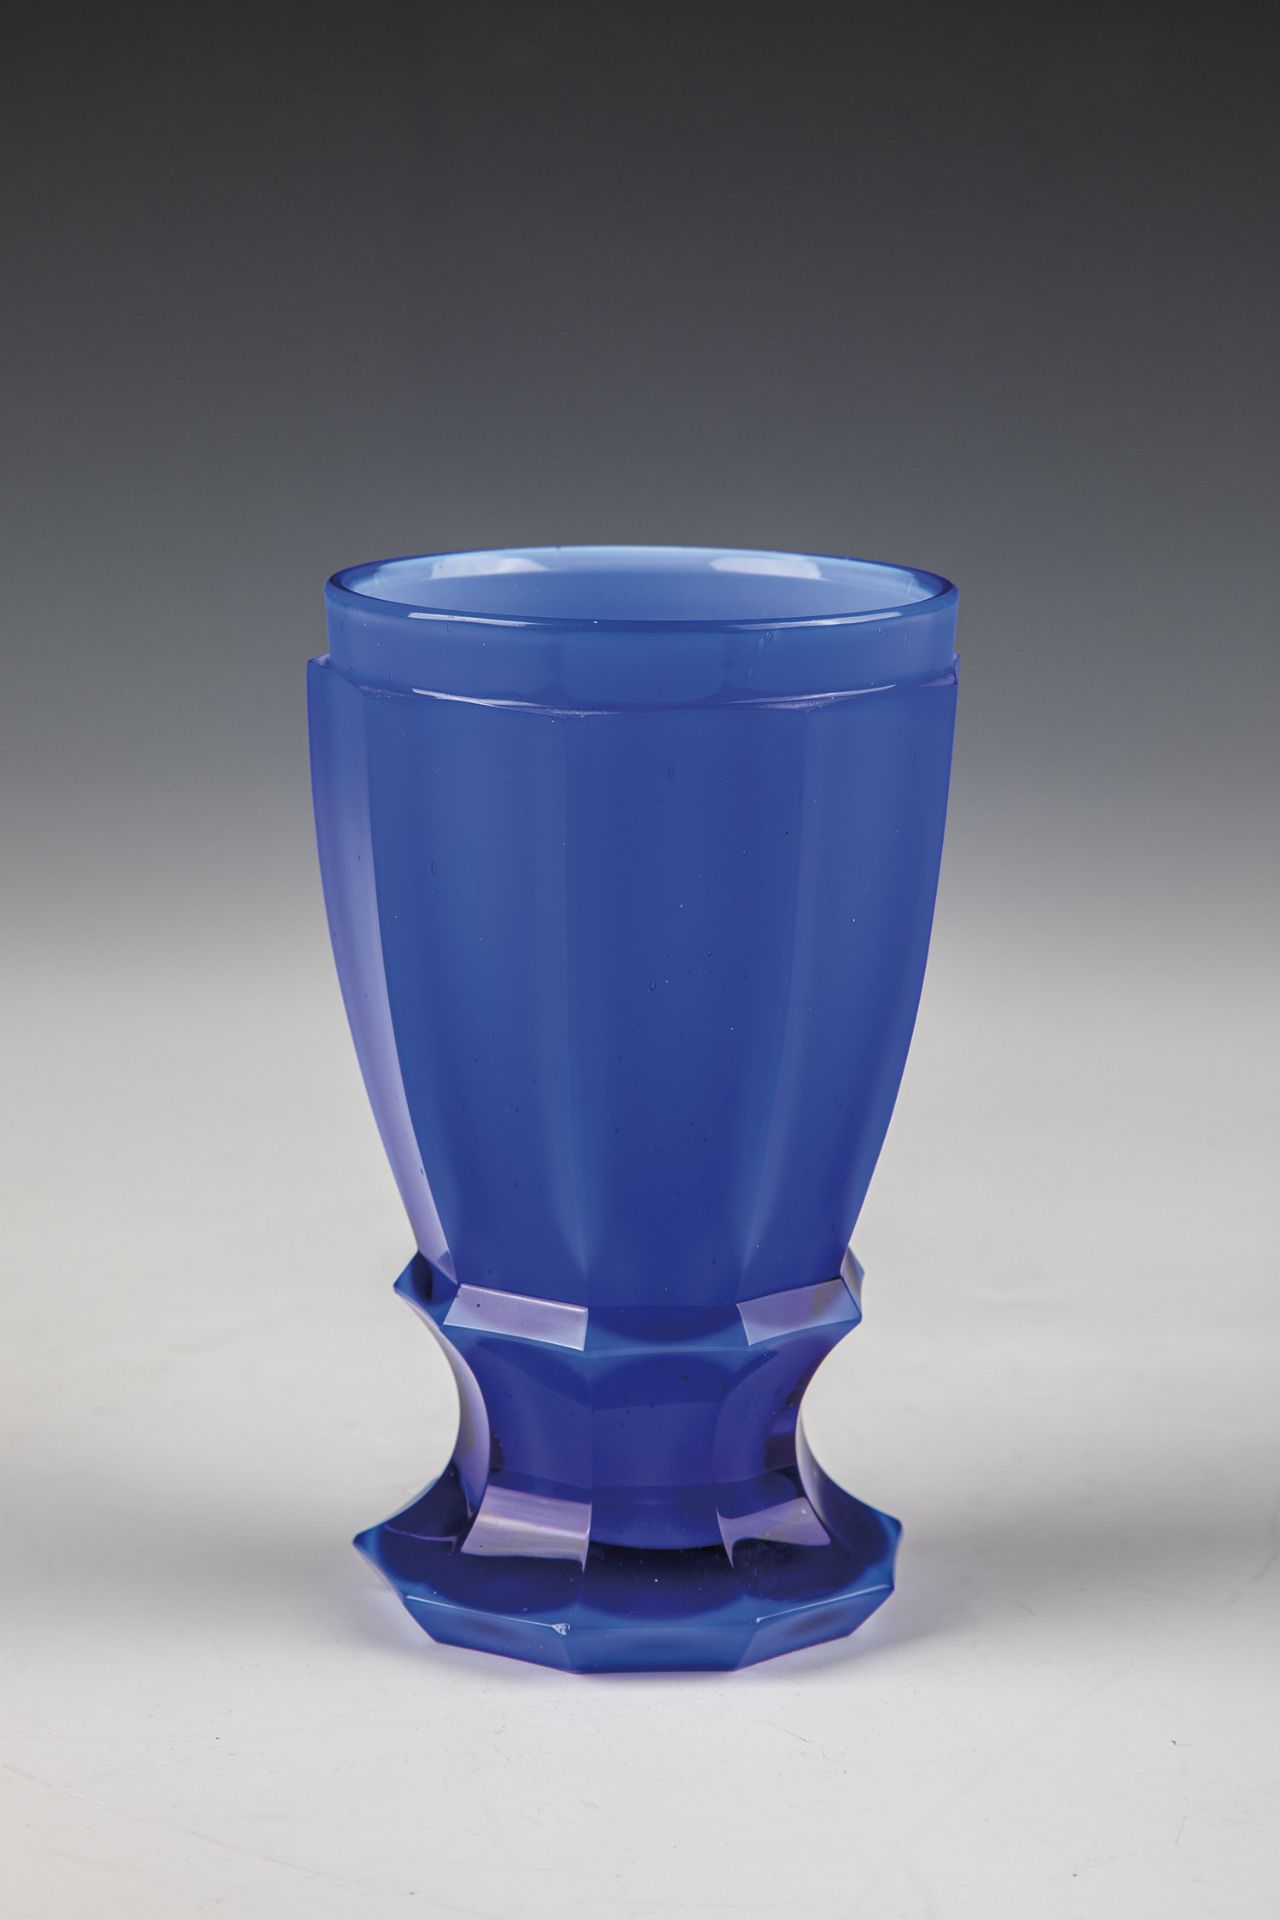 Agatin beaker Wohl Buquoysche Glashuette, Georgenthal, 1835-1840 Cobalt blue glass with opalescent